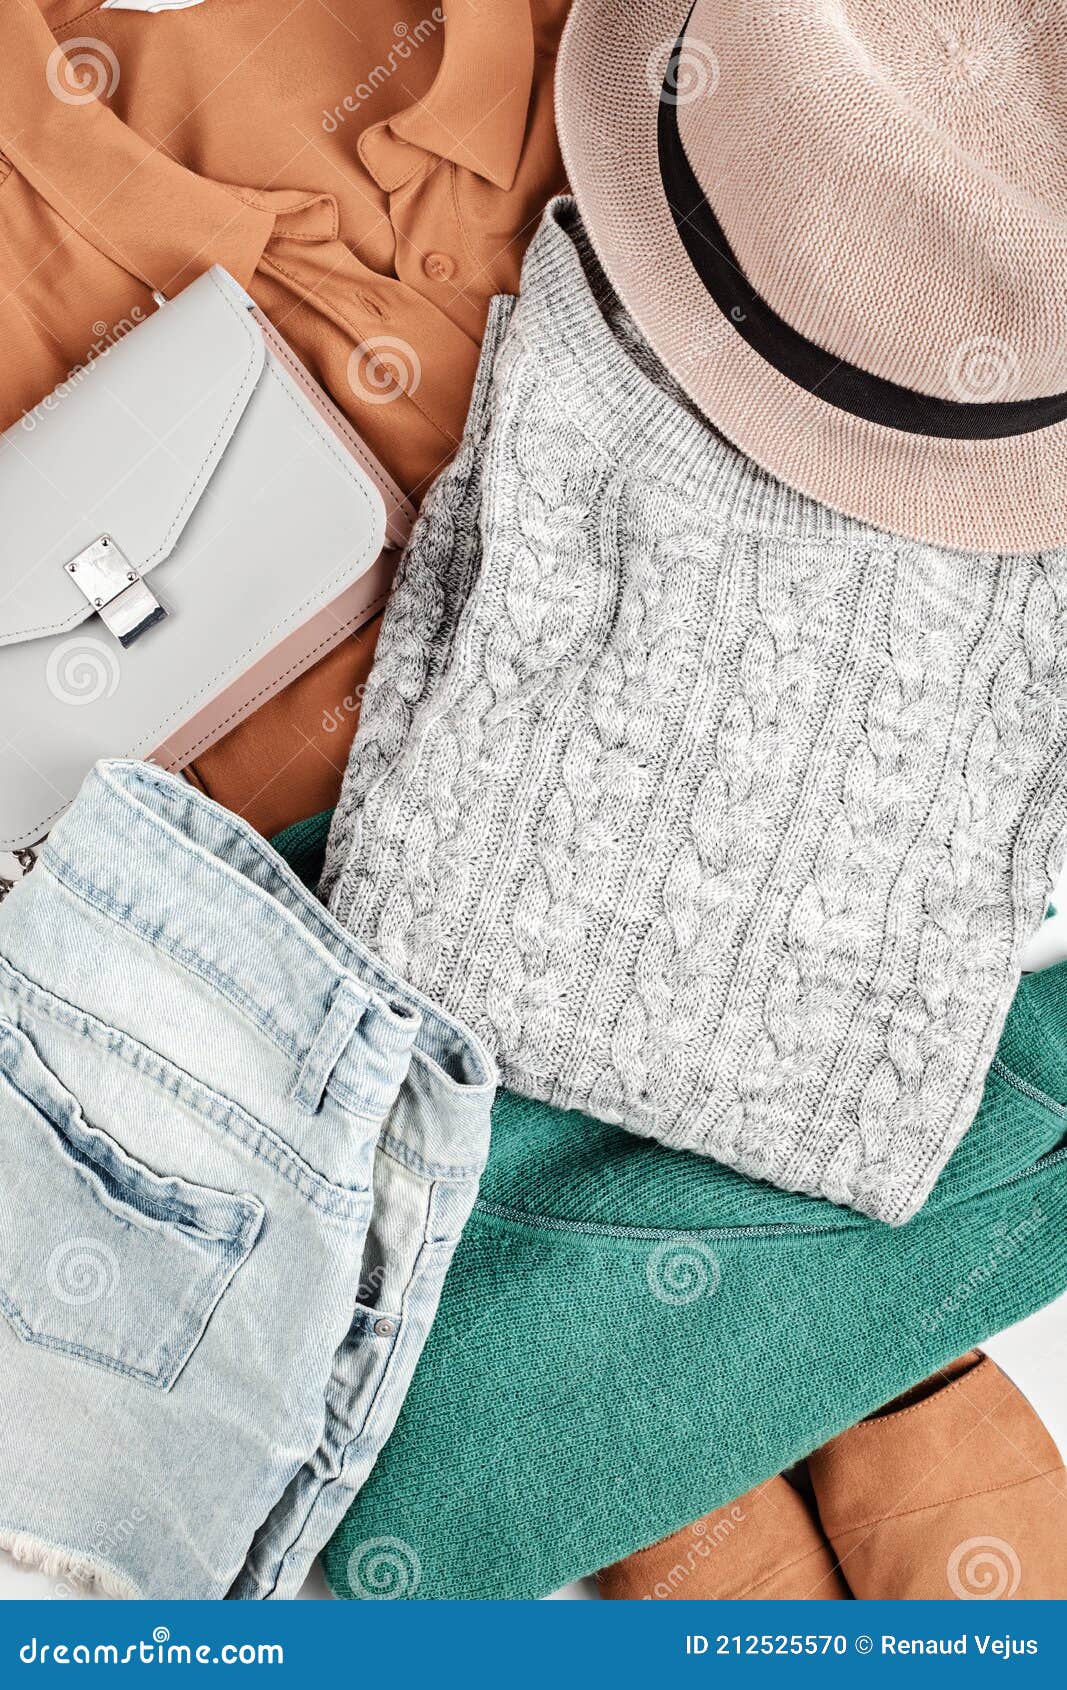 Second Hand Wardrobe Idea. Top View Over Woman Outfit. Stock Photo ...